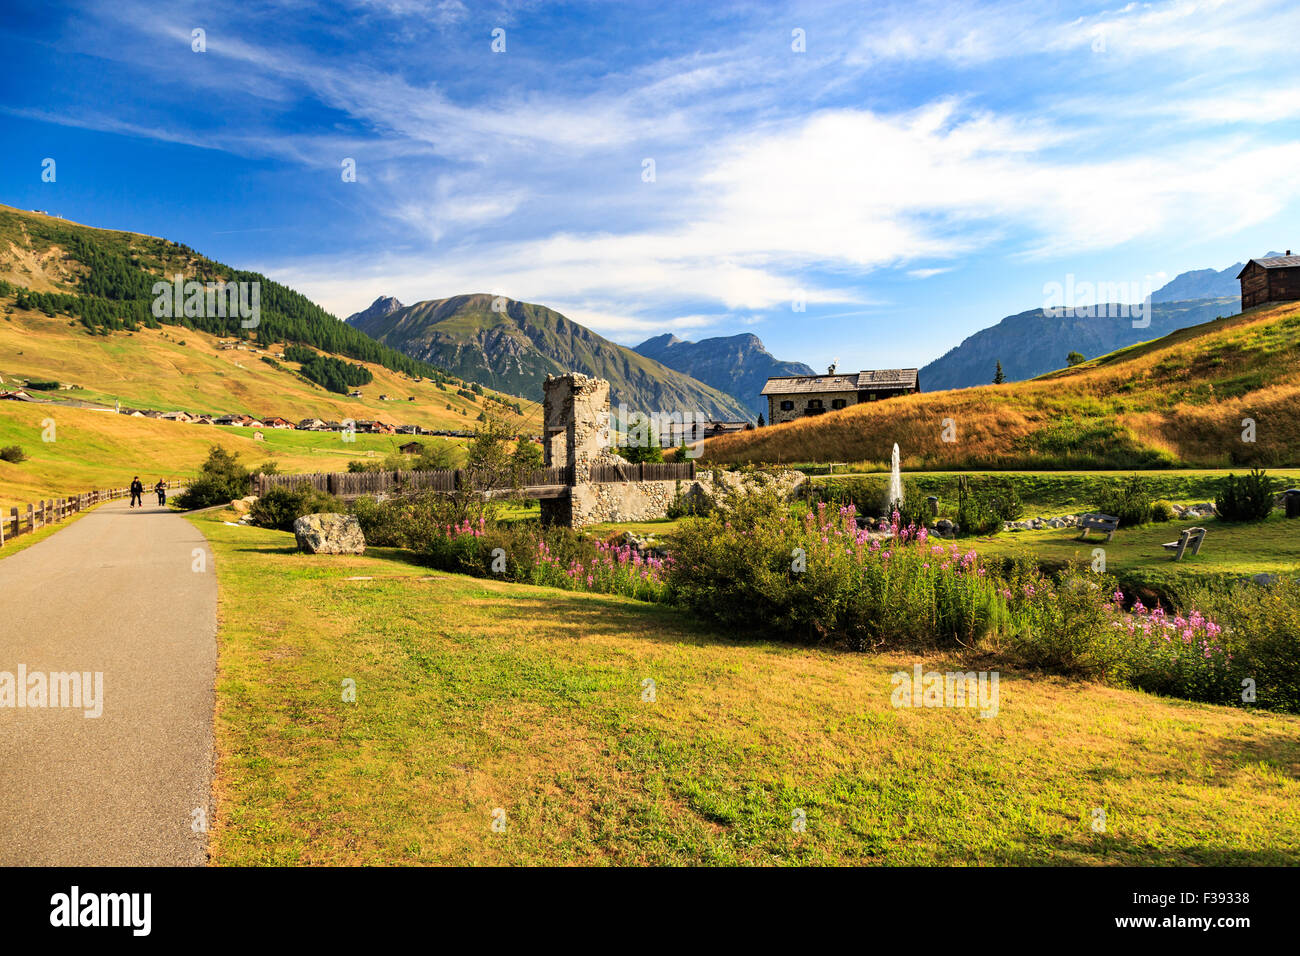 Picturesque landscape in Livigno, Lombardy, Italy with formal garden with an old stone building and benches, people on the road, Stock Photo